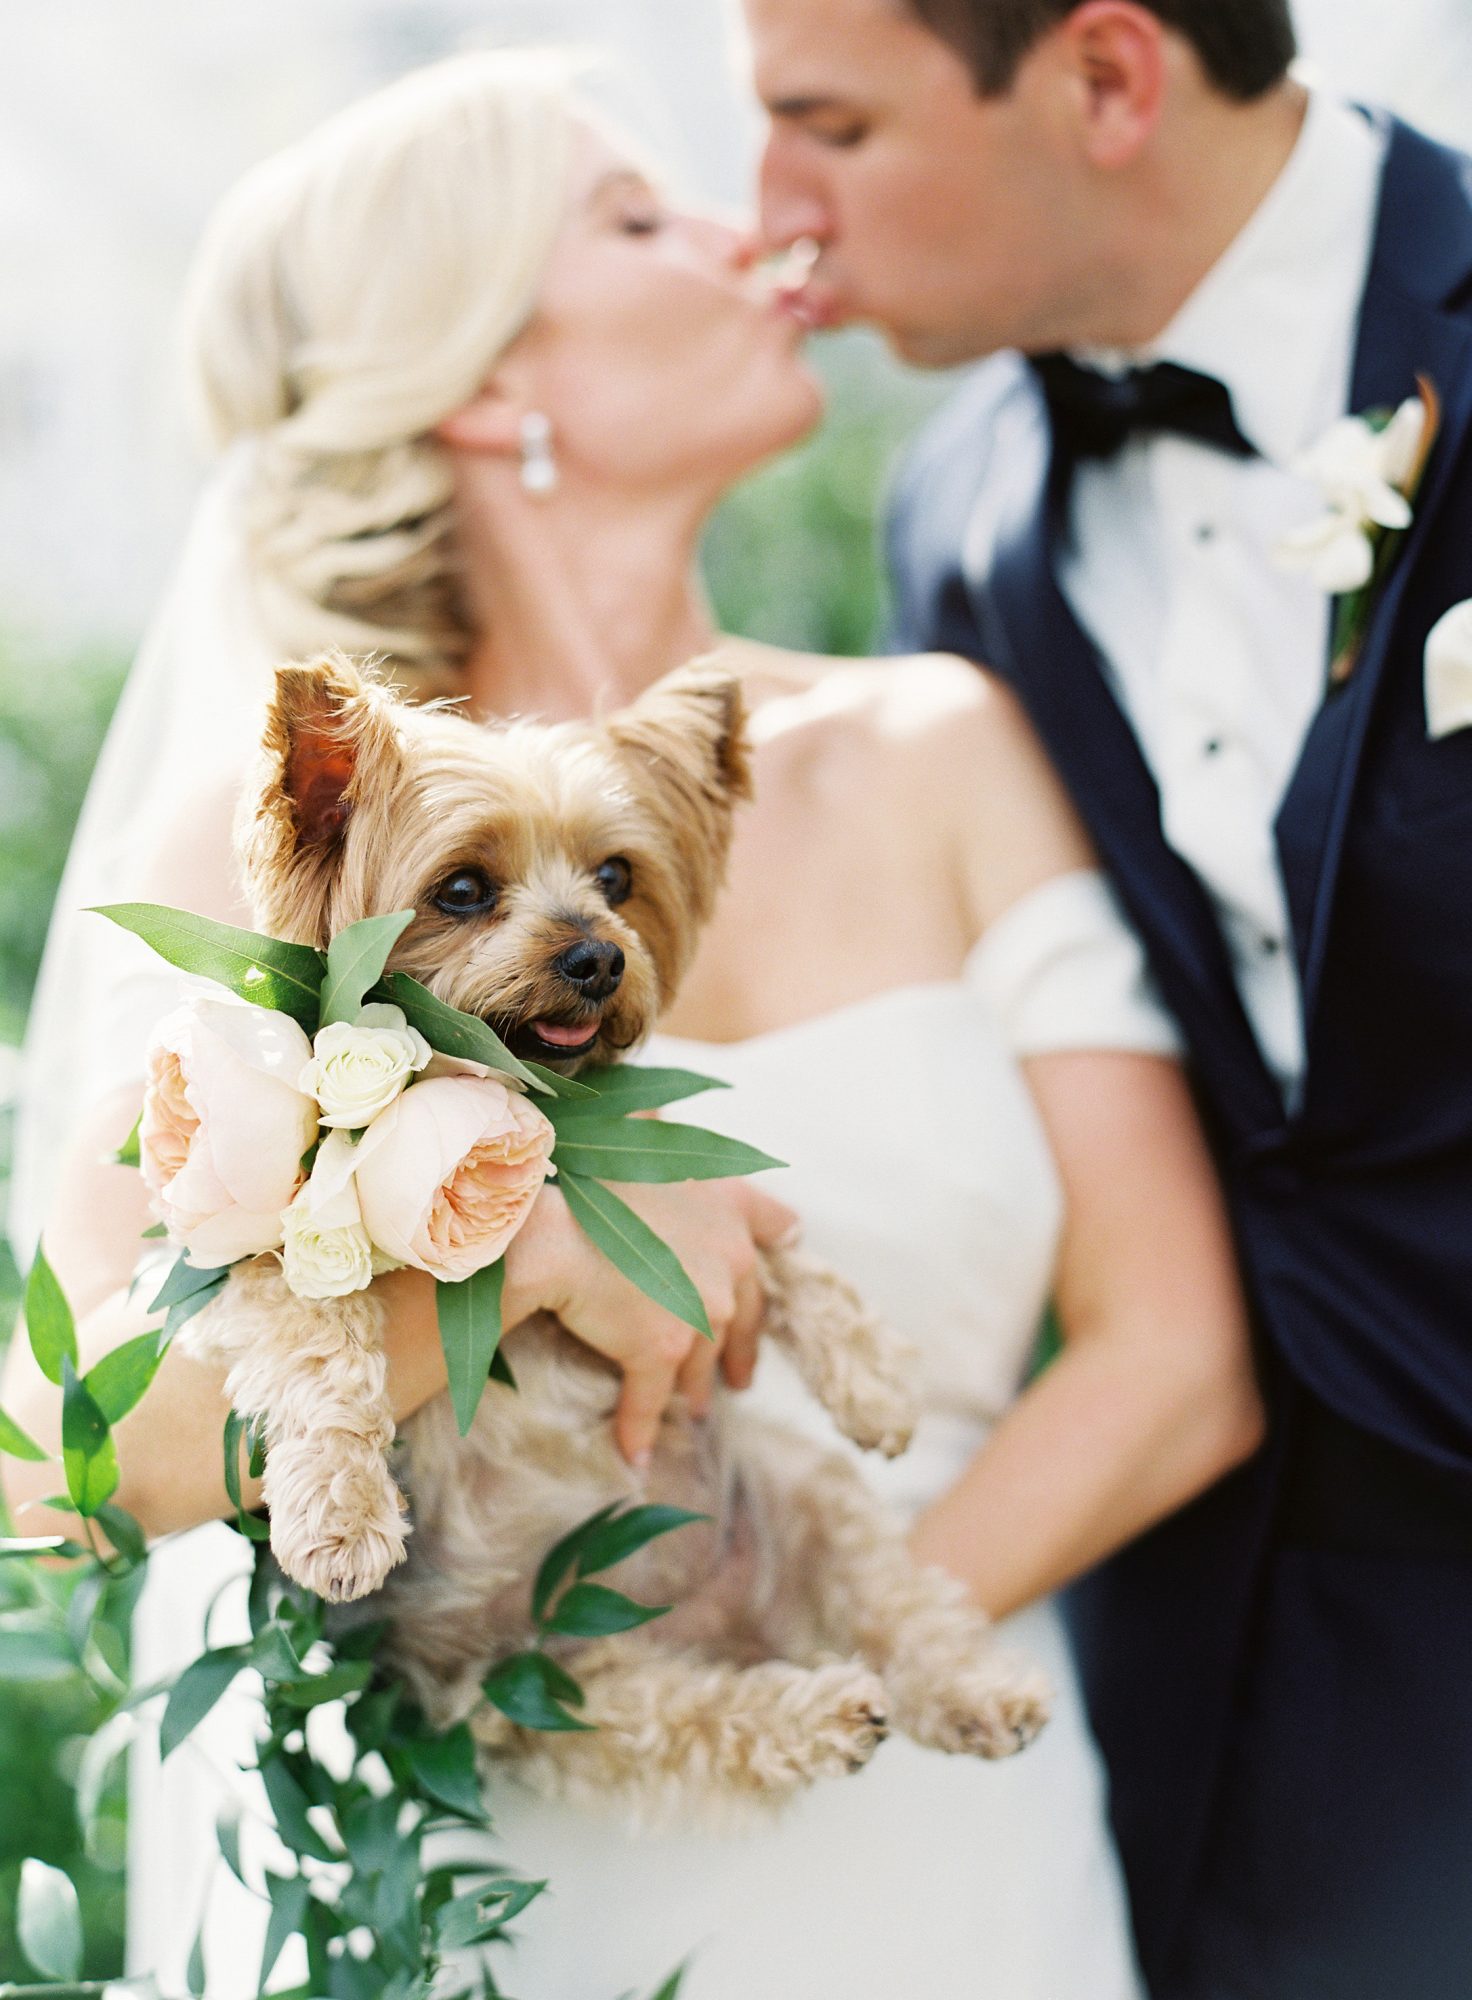 Dog with bride and groom